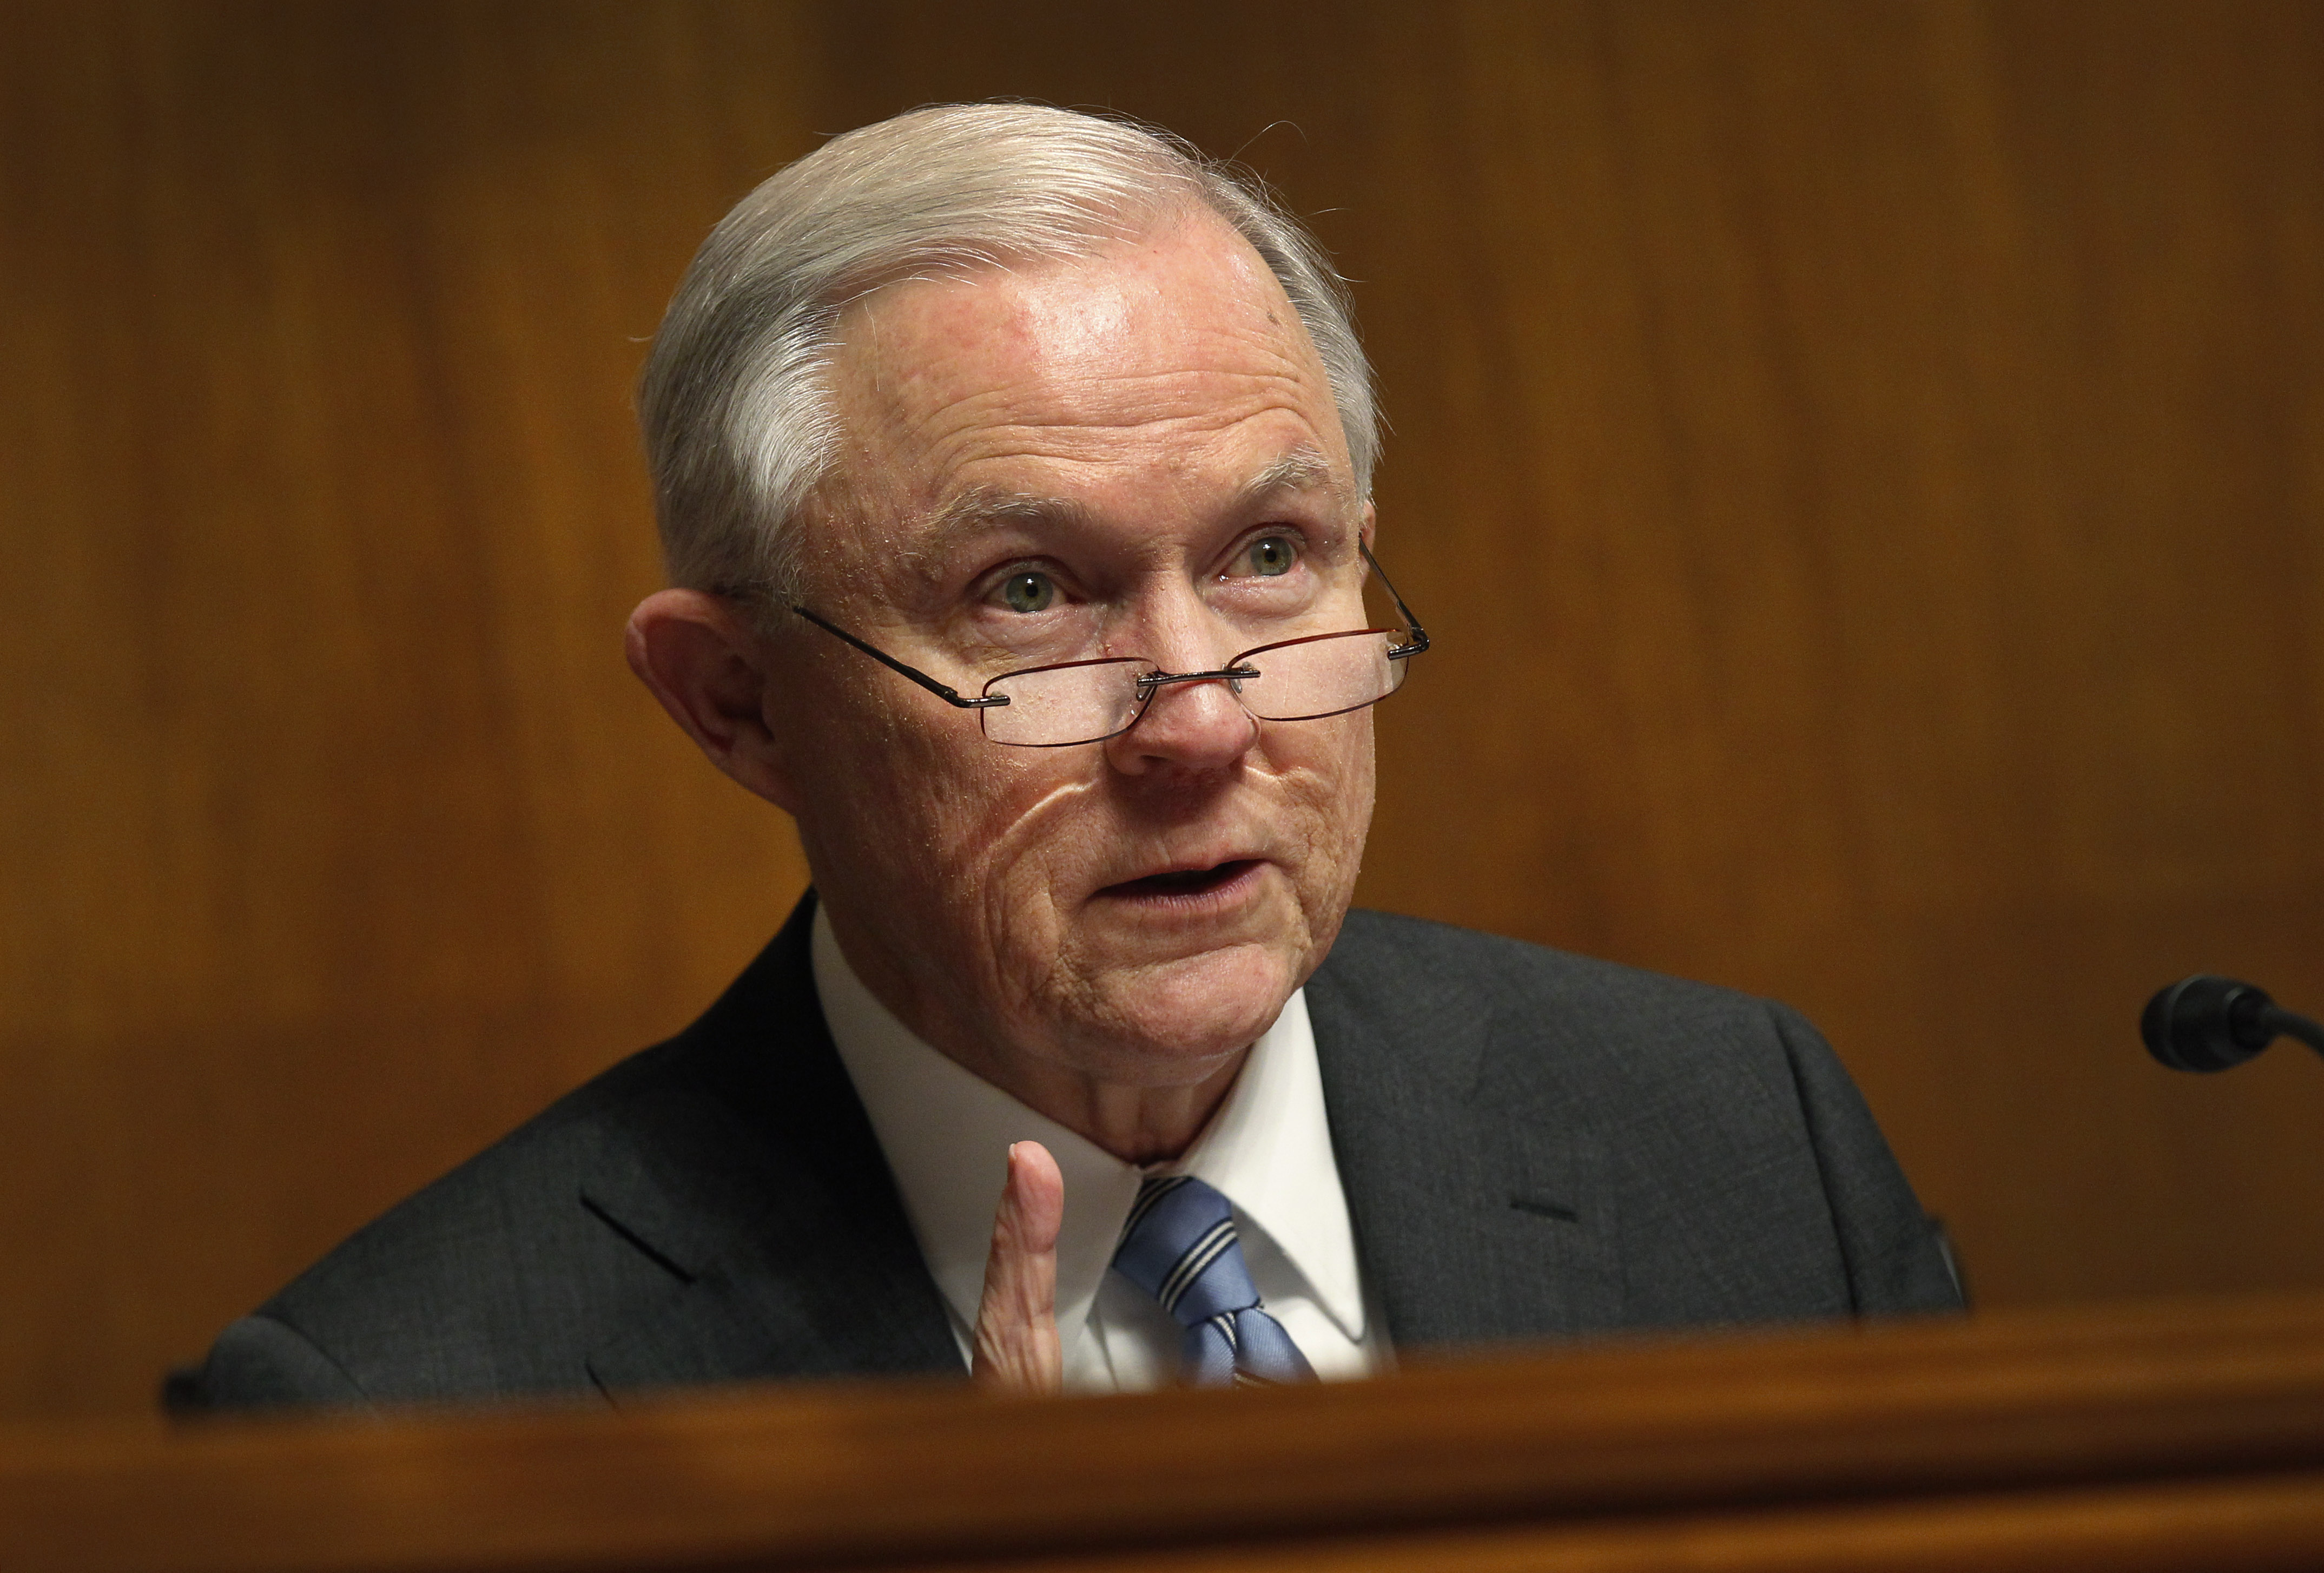 Jeff Sessions, a white male, wear a pair of glasses. He sits behind a desk and points a finger, about to make a statement.